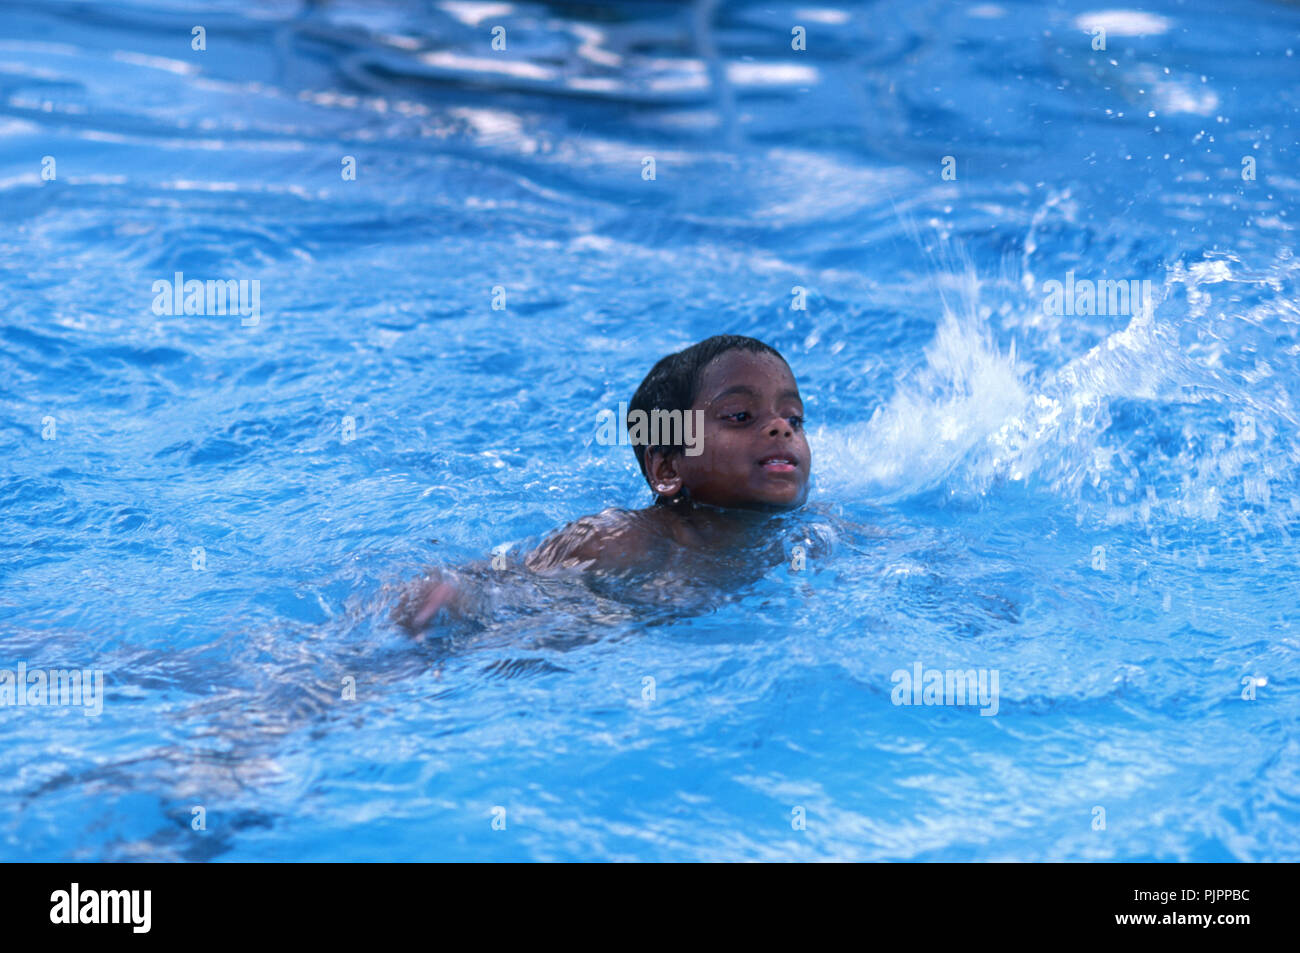 Young boy swimming Stock Photo